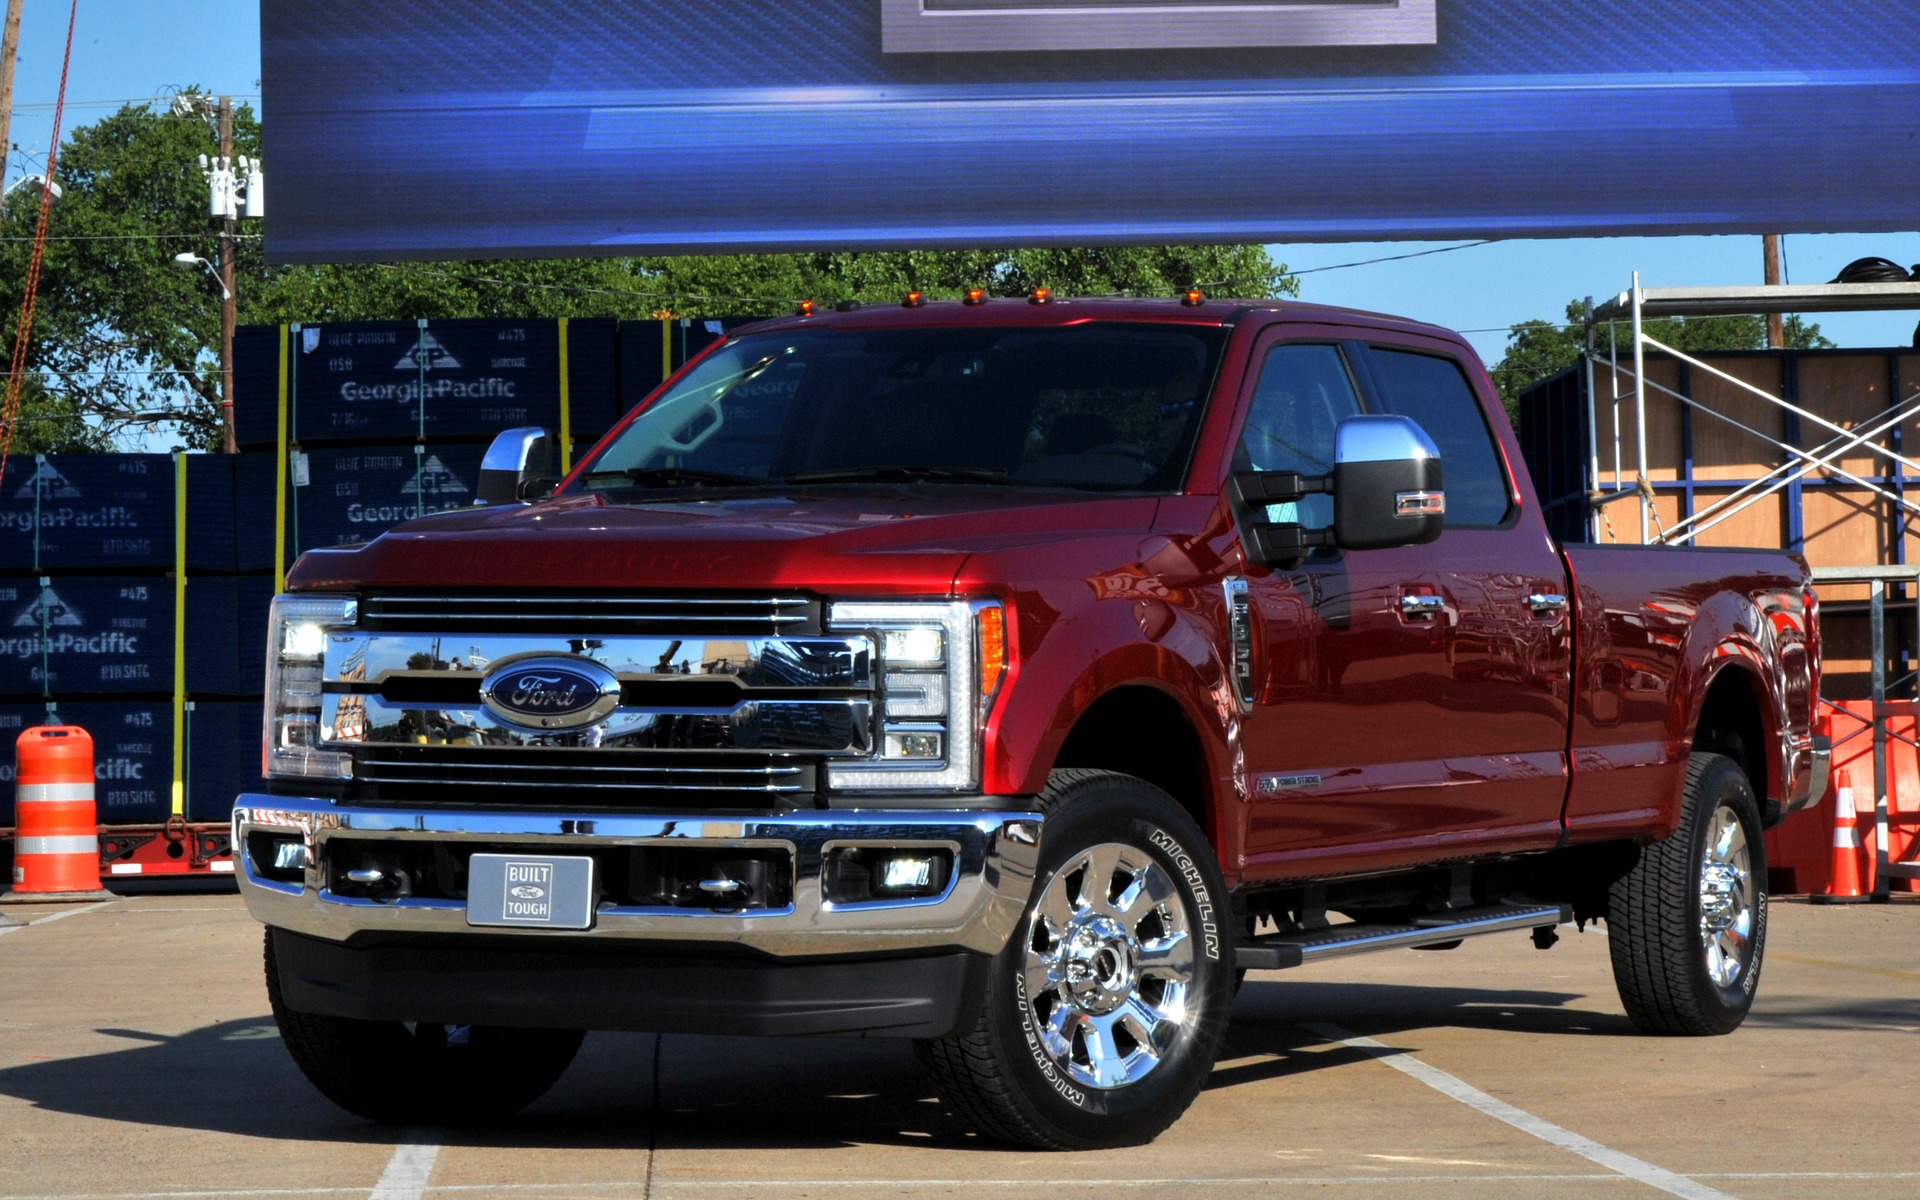 The all-new 2017 Ford Super Duty